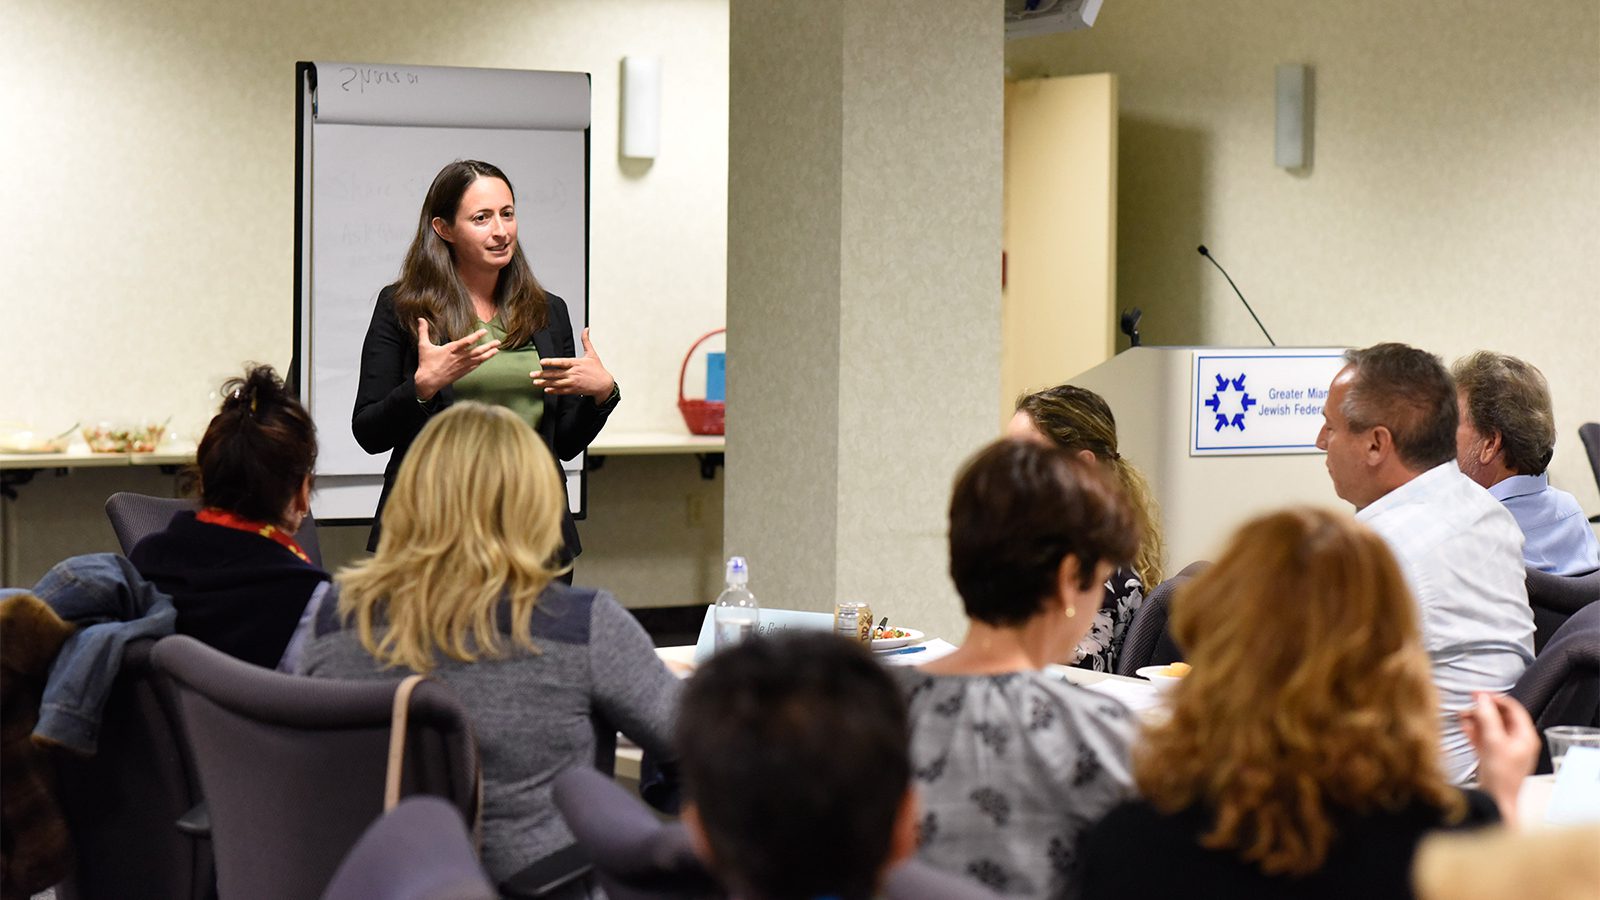 Melissa Weintraub, left, leads a Resetting the Table discussion about Israel on May 15, 2018, in Miami, Florida. Photo by Michele Eve Sandberg